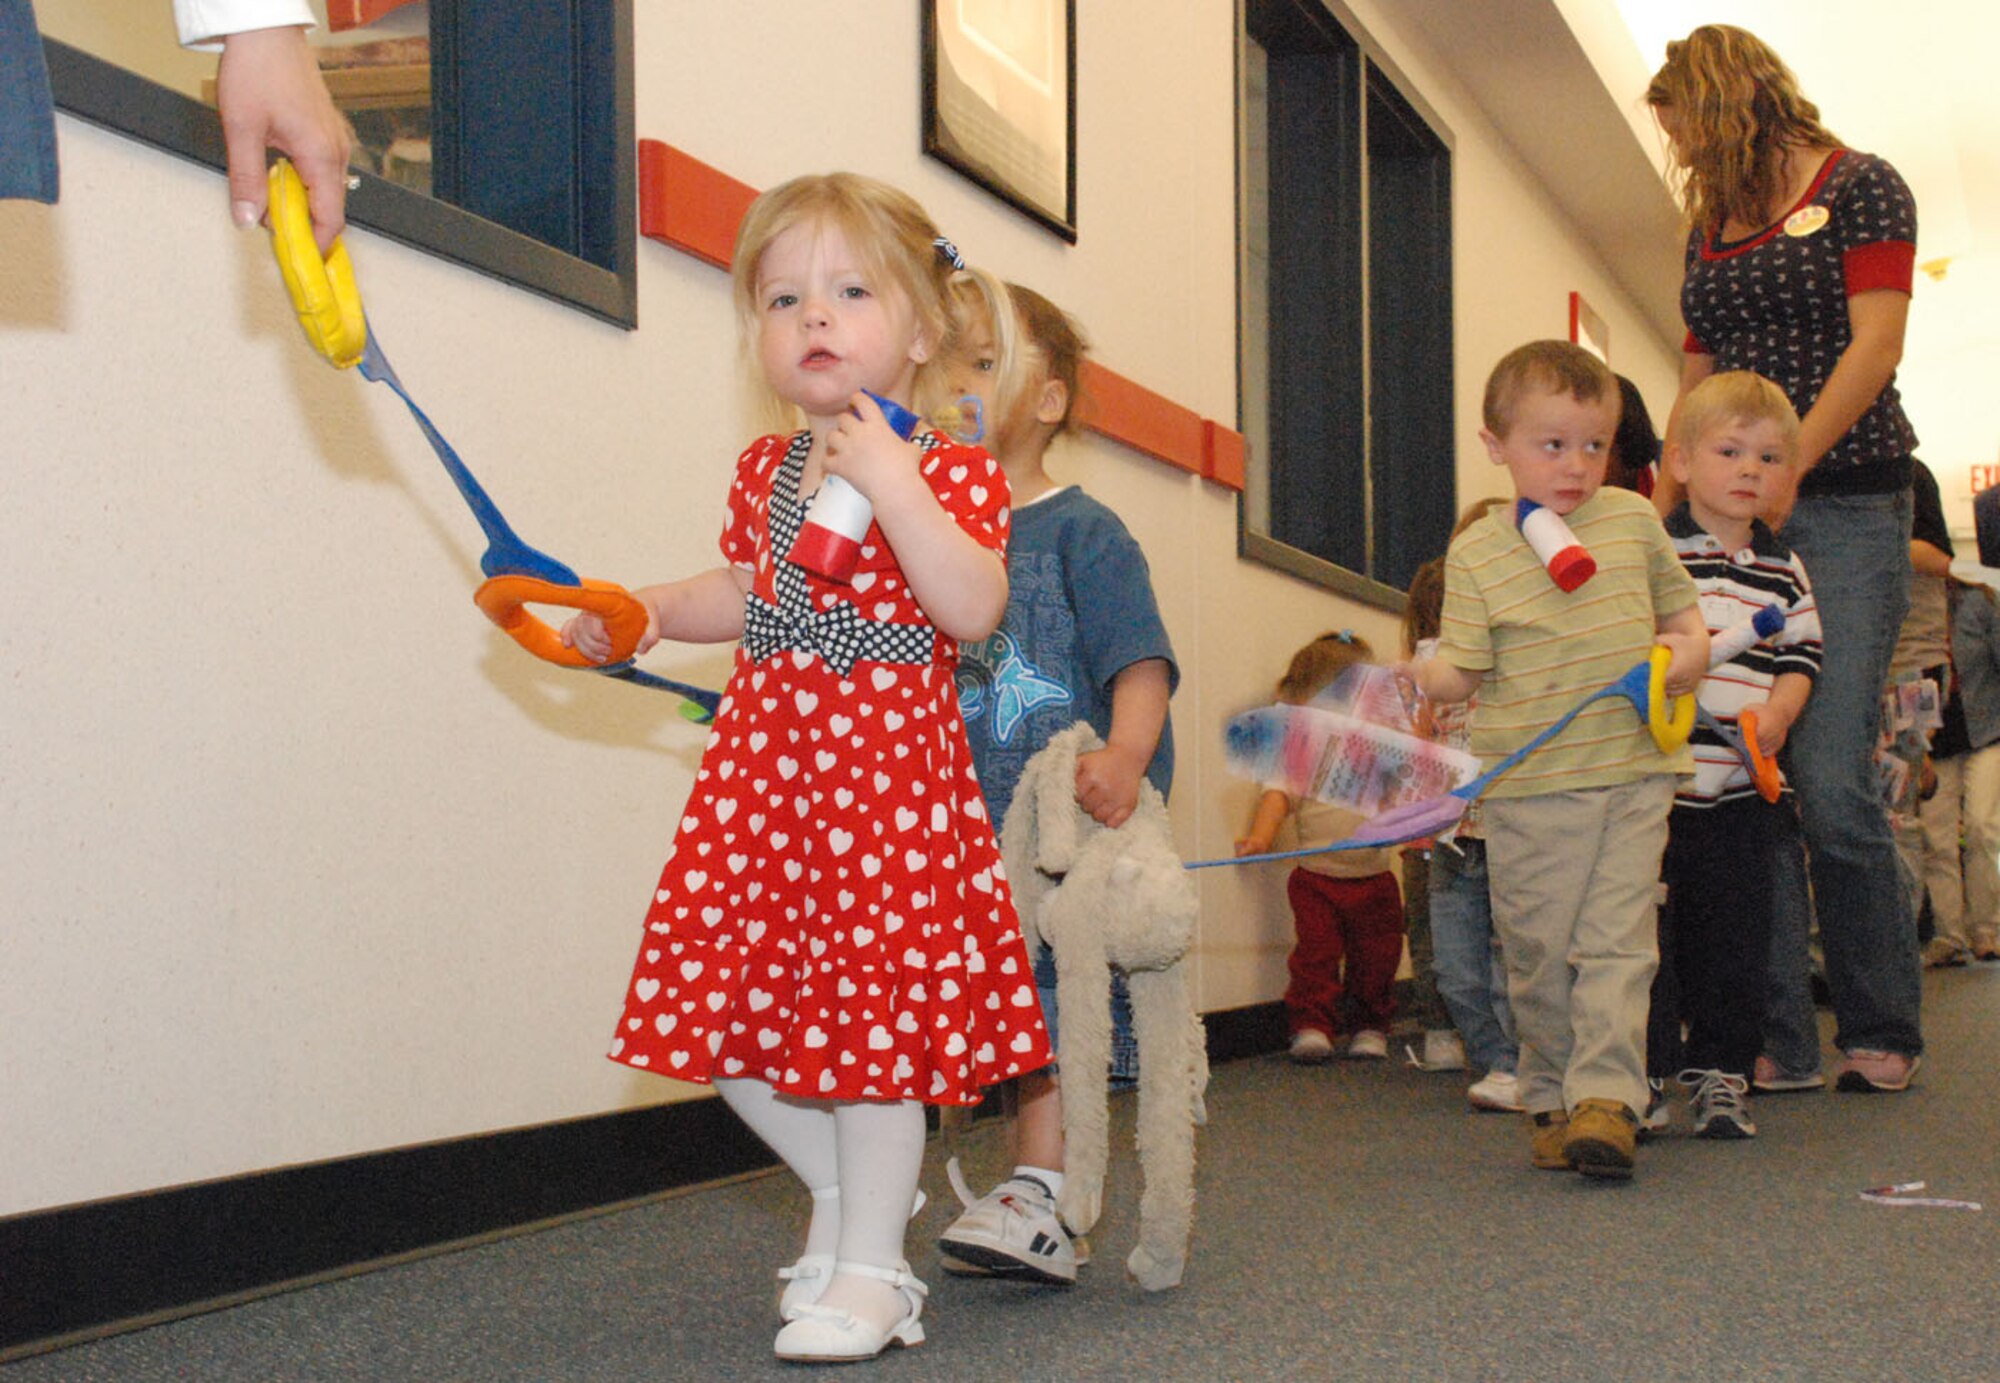 Spencer Love, Peyton York and Christopher Barto lead the line as the parade moves along the hallways of the child development center. The CDC employees constructed ropes so that the children could follow along. After the parade, the CDC staff handed out pamphlets on upcoming events.